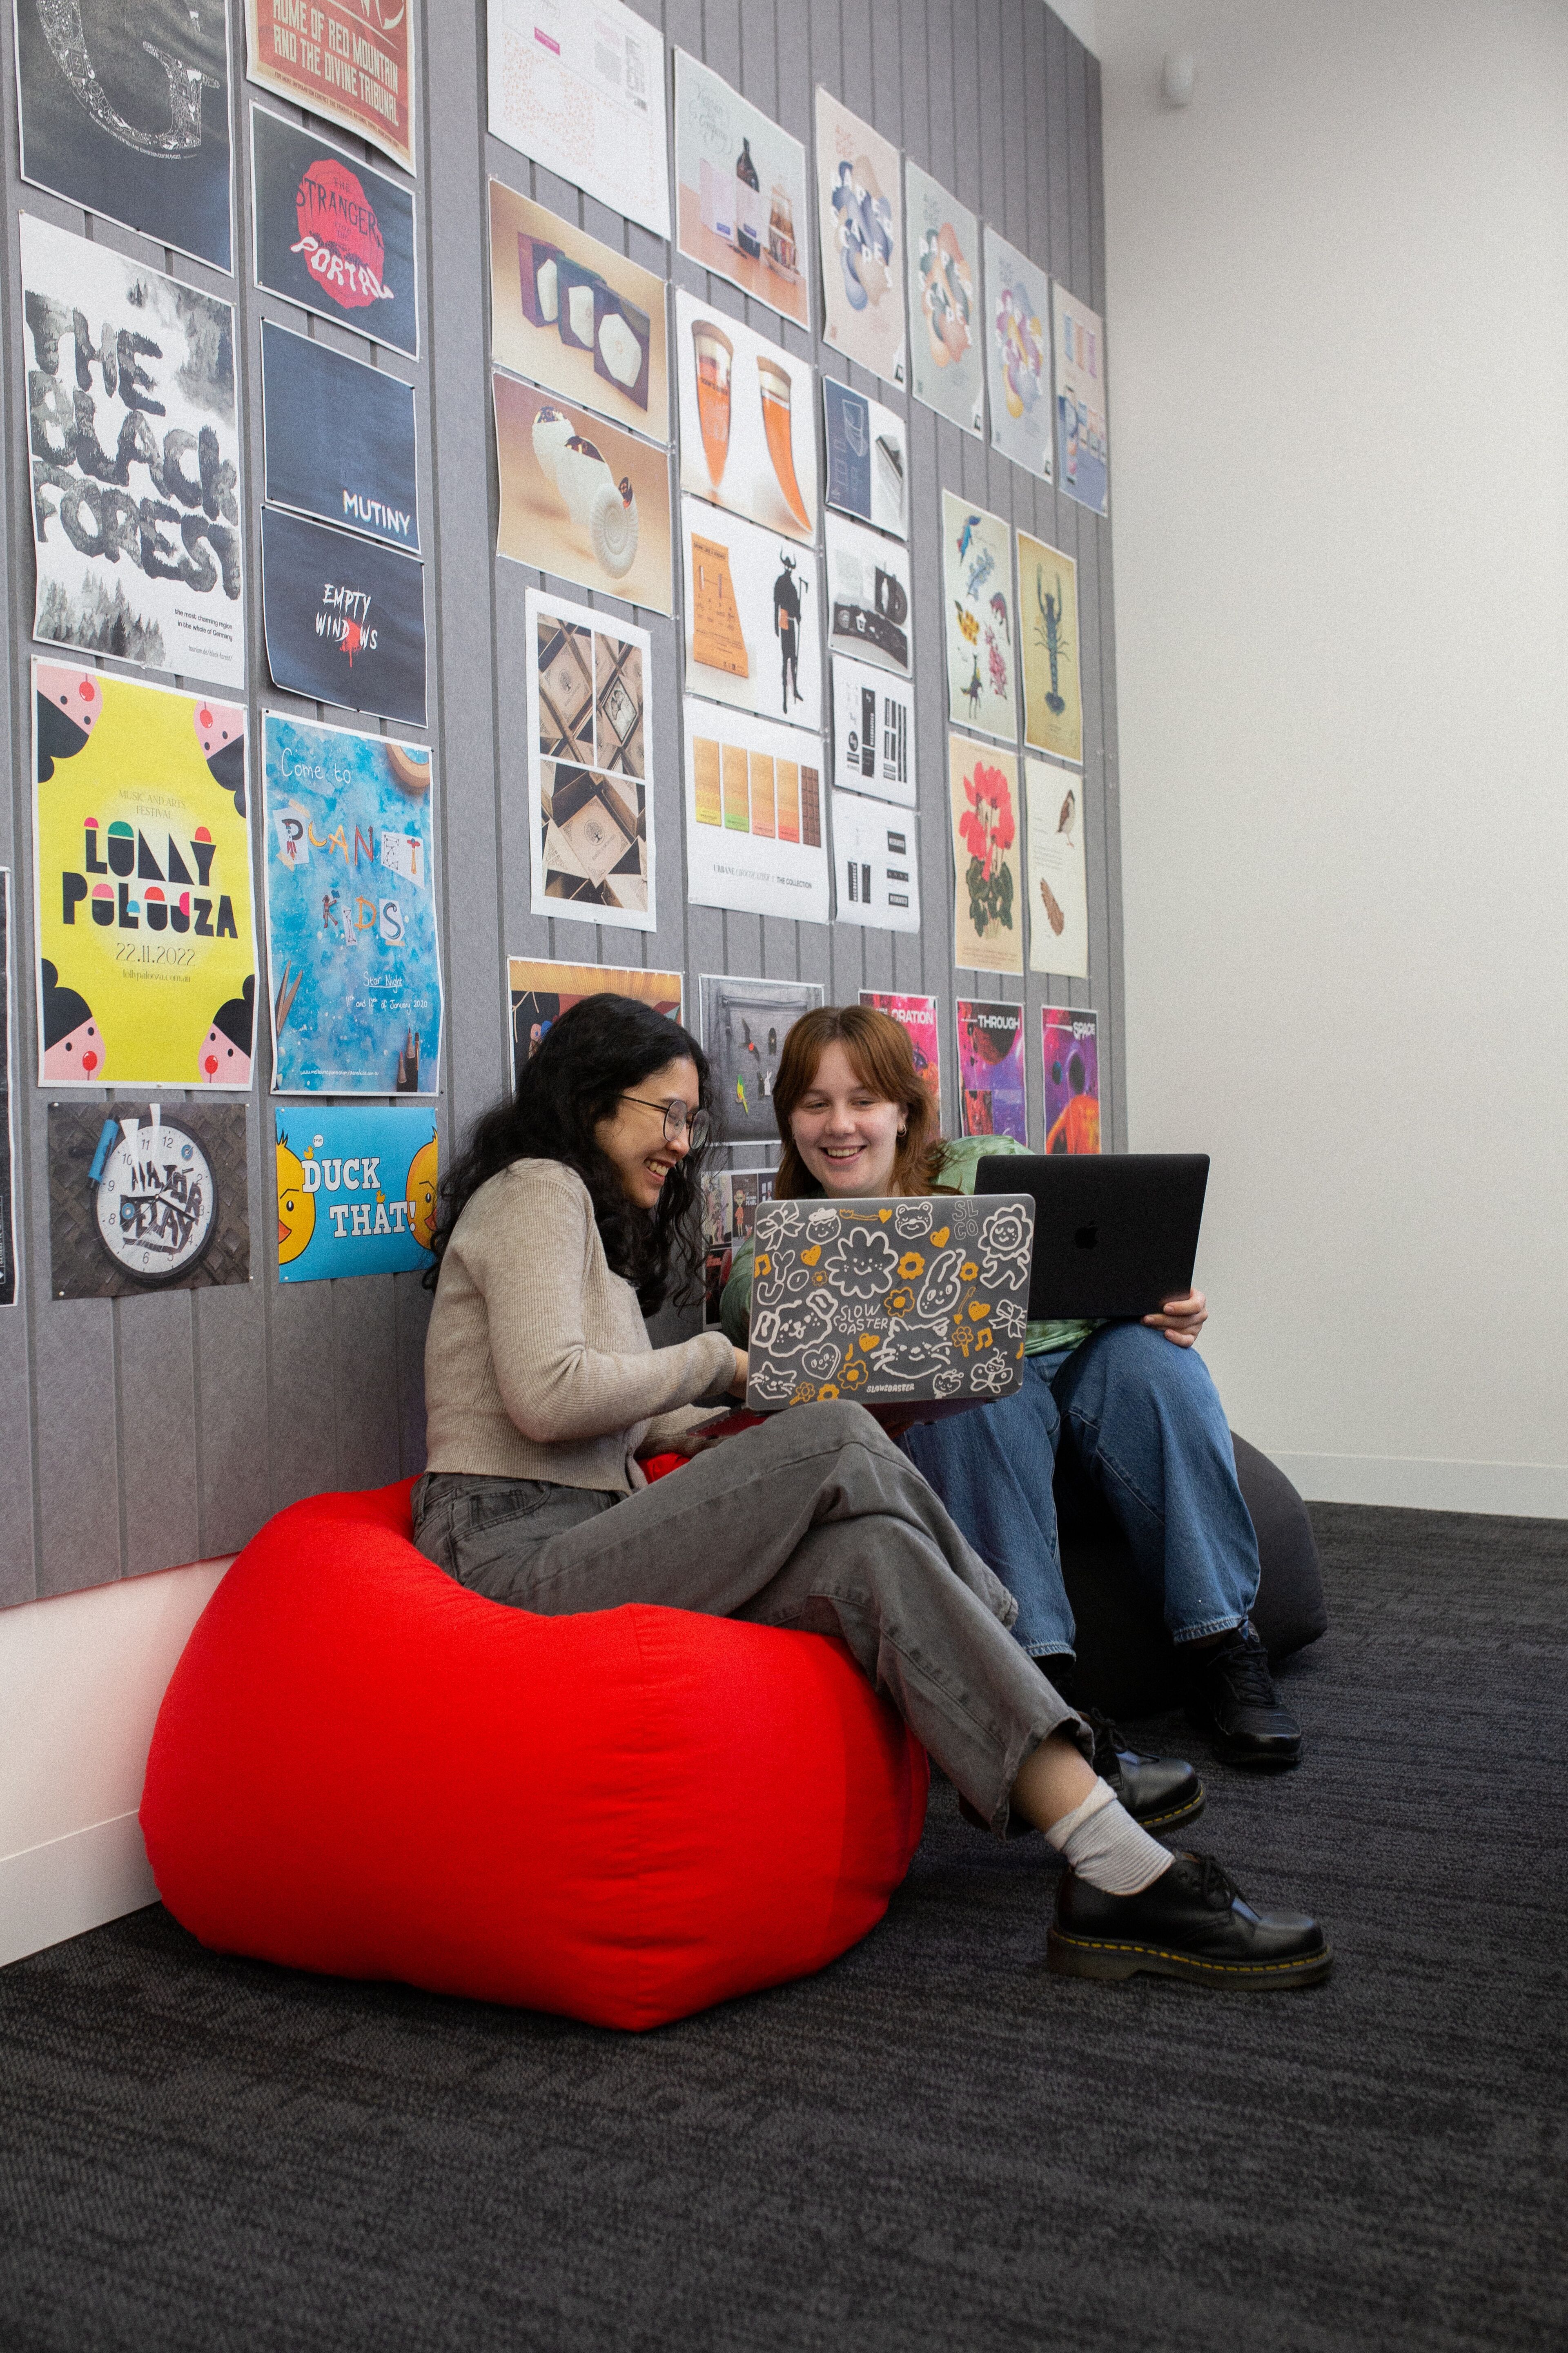 Two students laugh and share ideas on a red beanbag in a vibrant campus lounge.